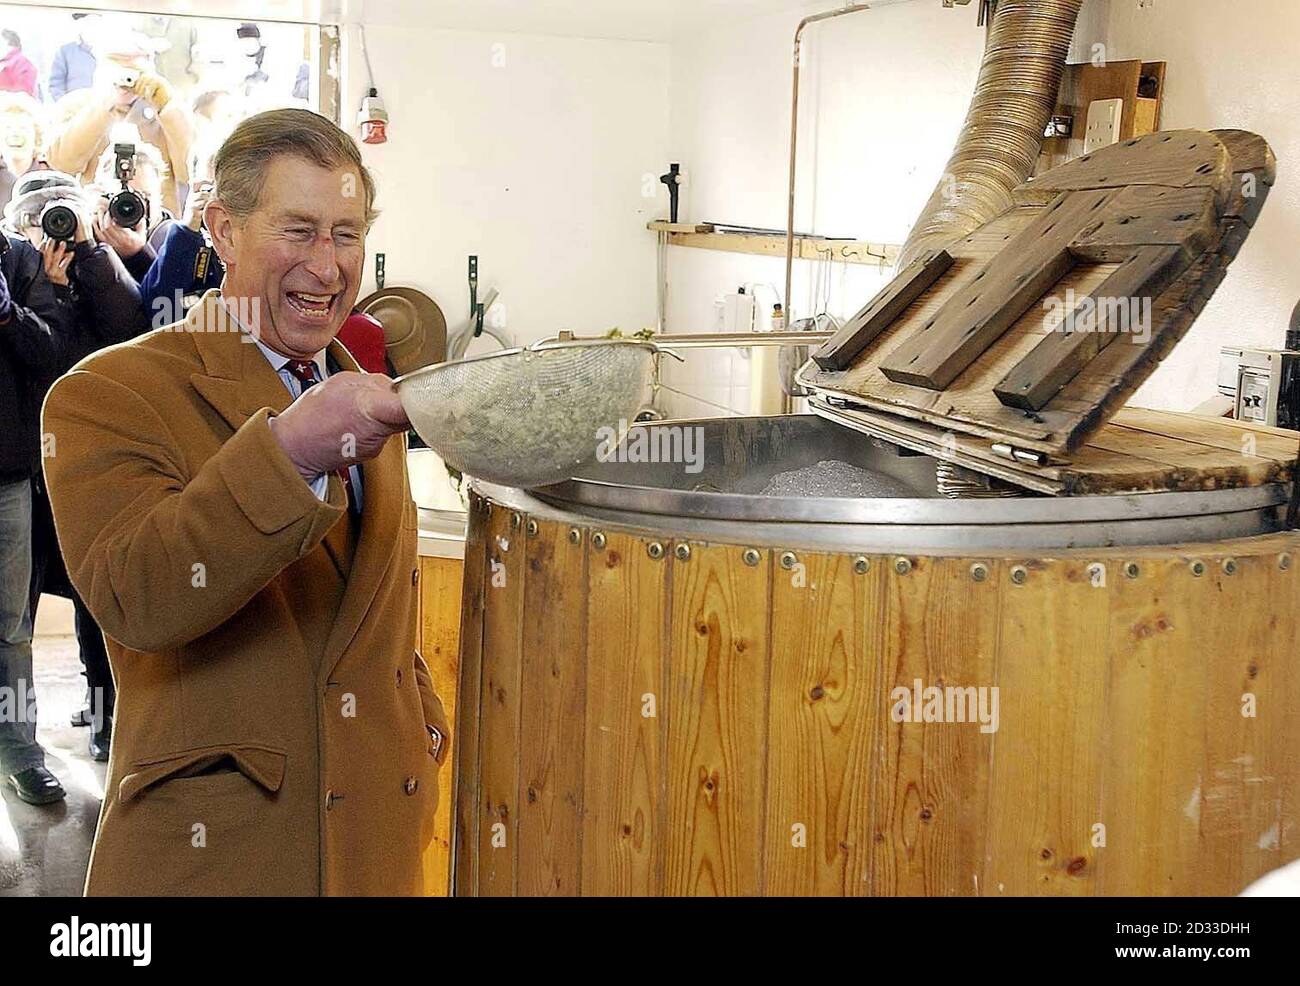 The Prince of Wales adds hopps to a vat at the village microbrewery during a visit to Newmarket Village, Hesket, Cumbria. Stock Photo